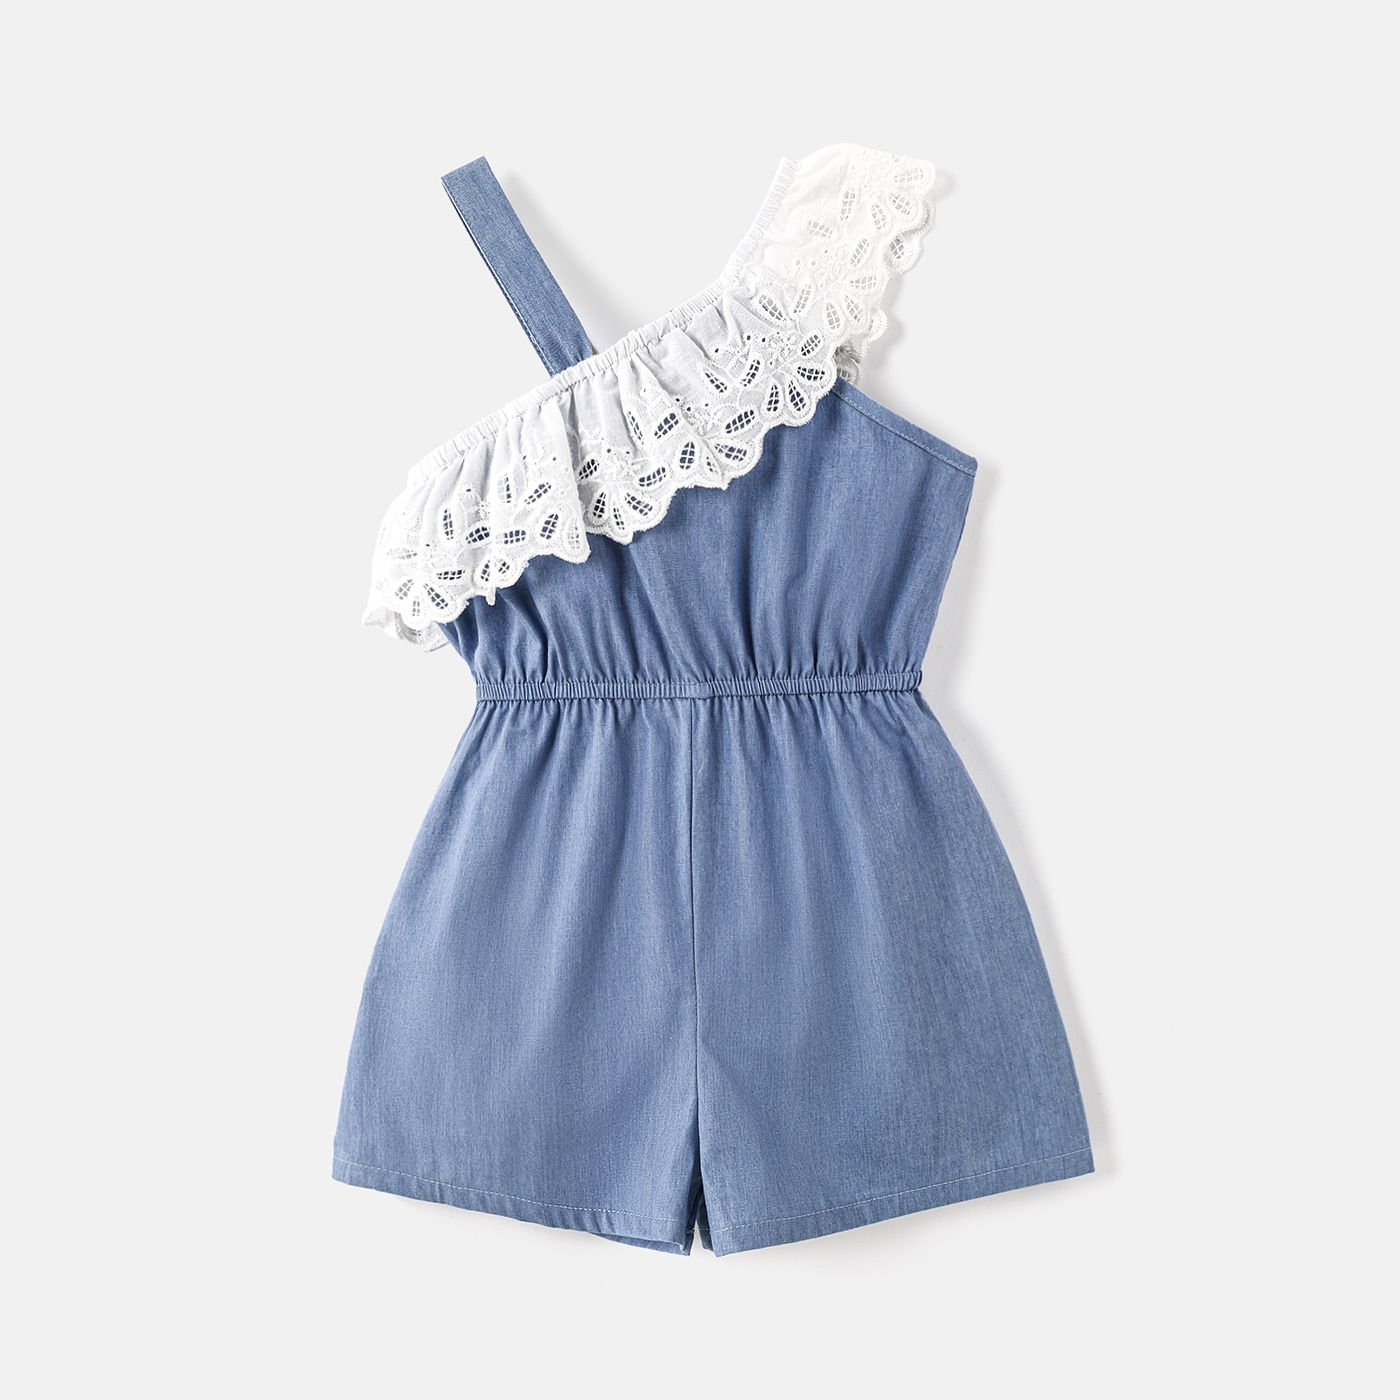 Toddler Girl 100% Cotton Lace Flounce Sleeveless Denim Rompers Jumpsuits